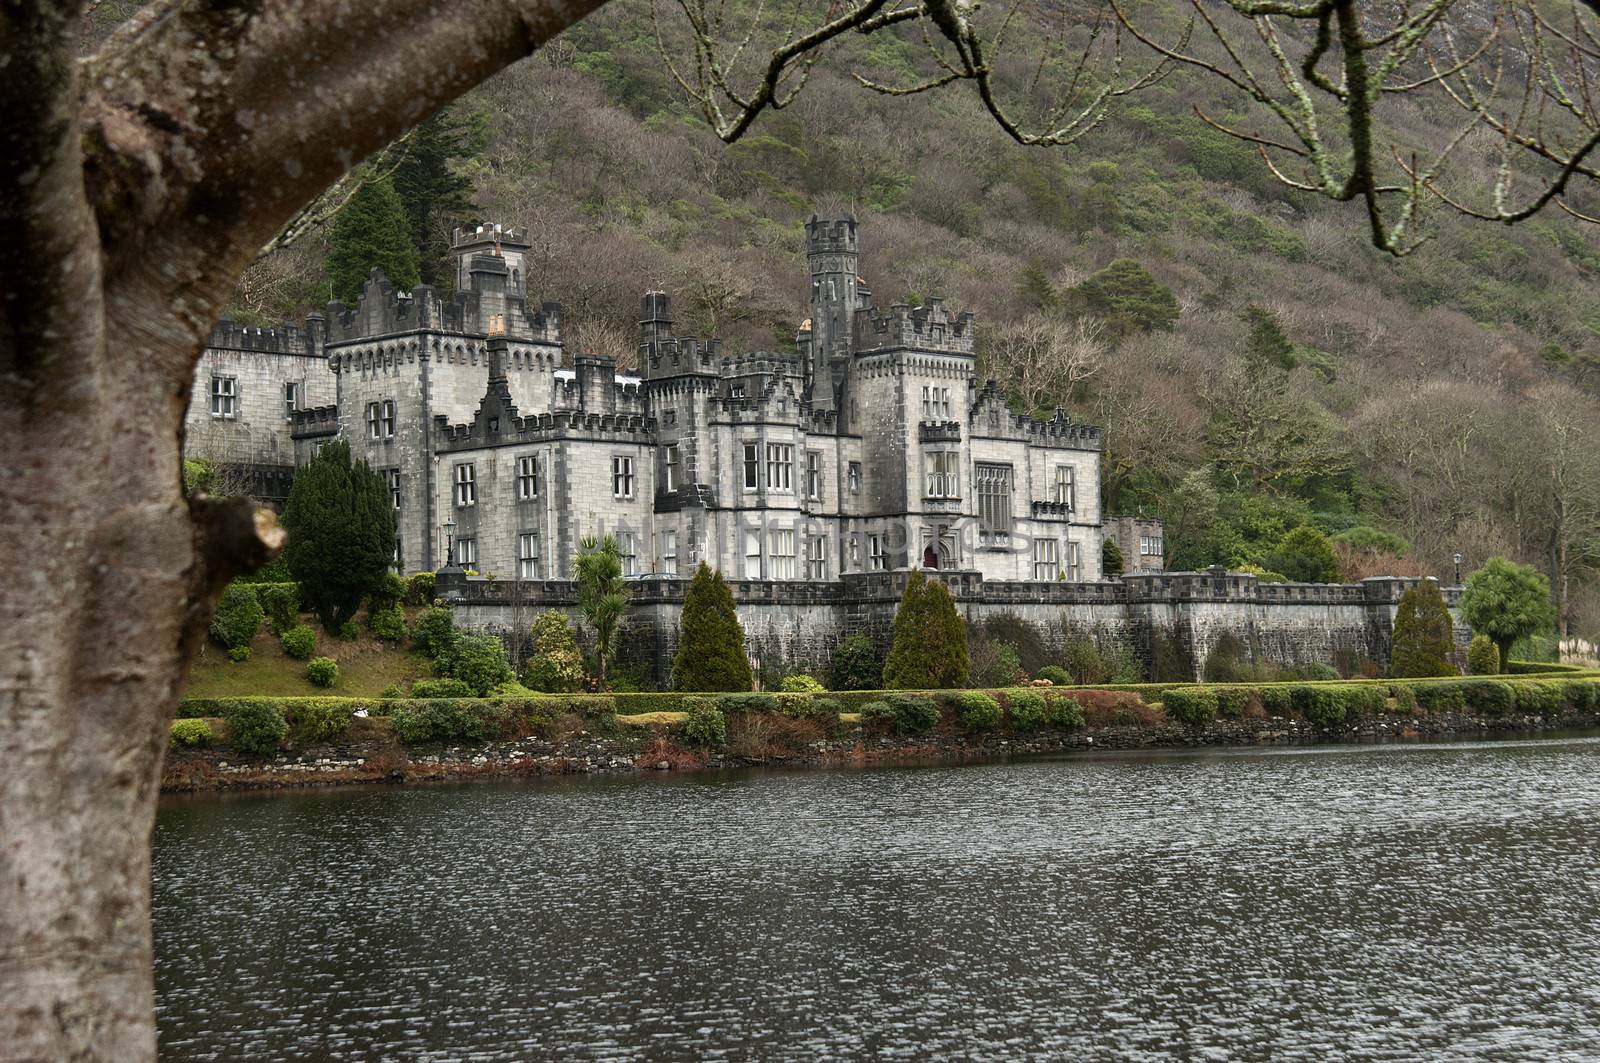 Kylemore Abbey (Irish: Mainistir na Coille Móire) is a Benedictine monastery founded in 1920 on the grounds of Kylemore Castle, in Connemara, County Galway, Ireland. The abbey was founded for Benedictine Nuns who fled Belgium in World War I.